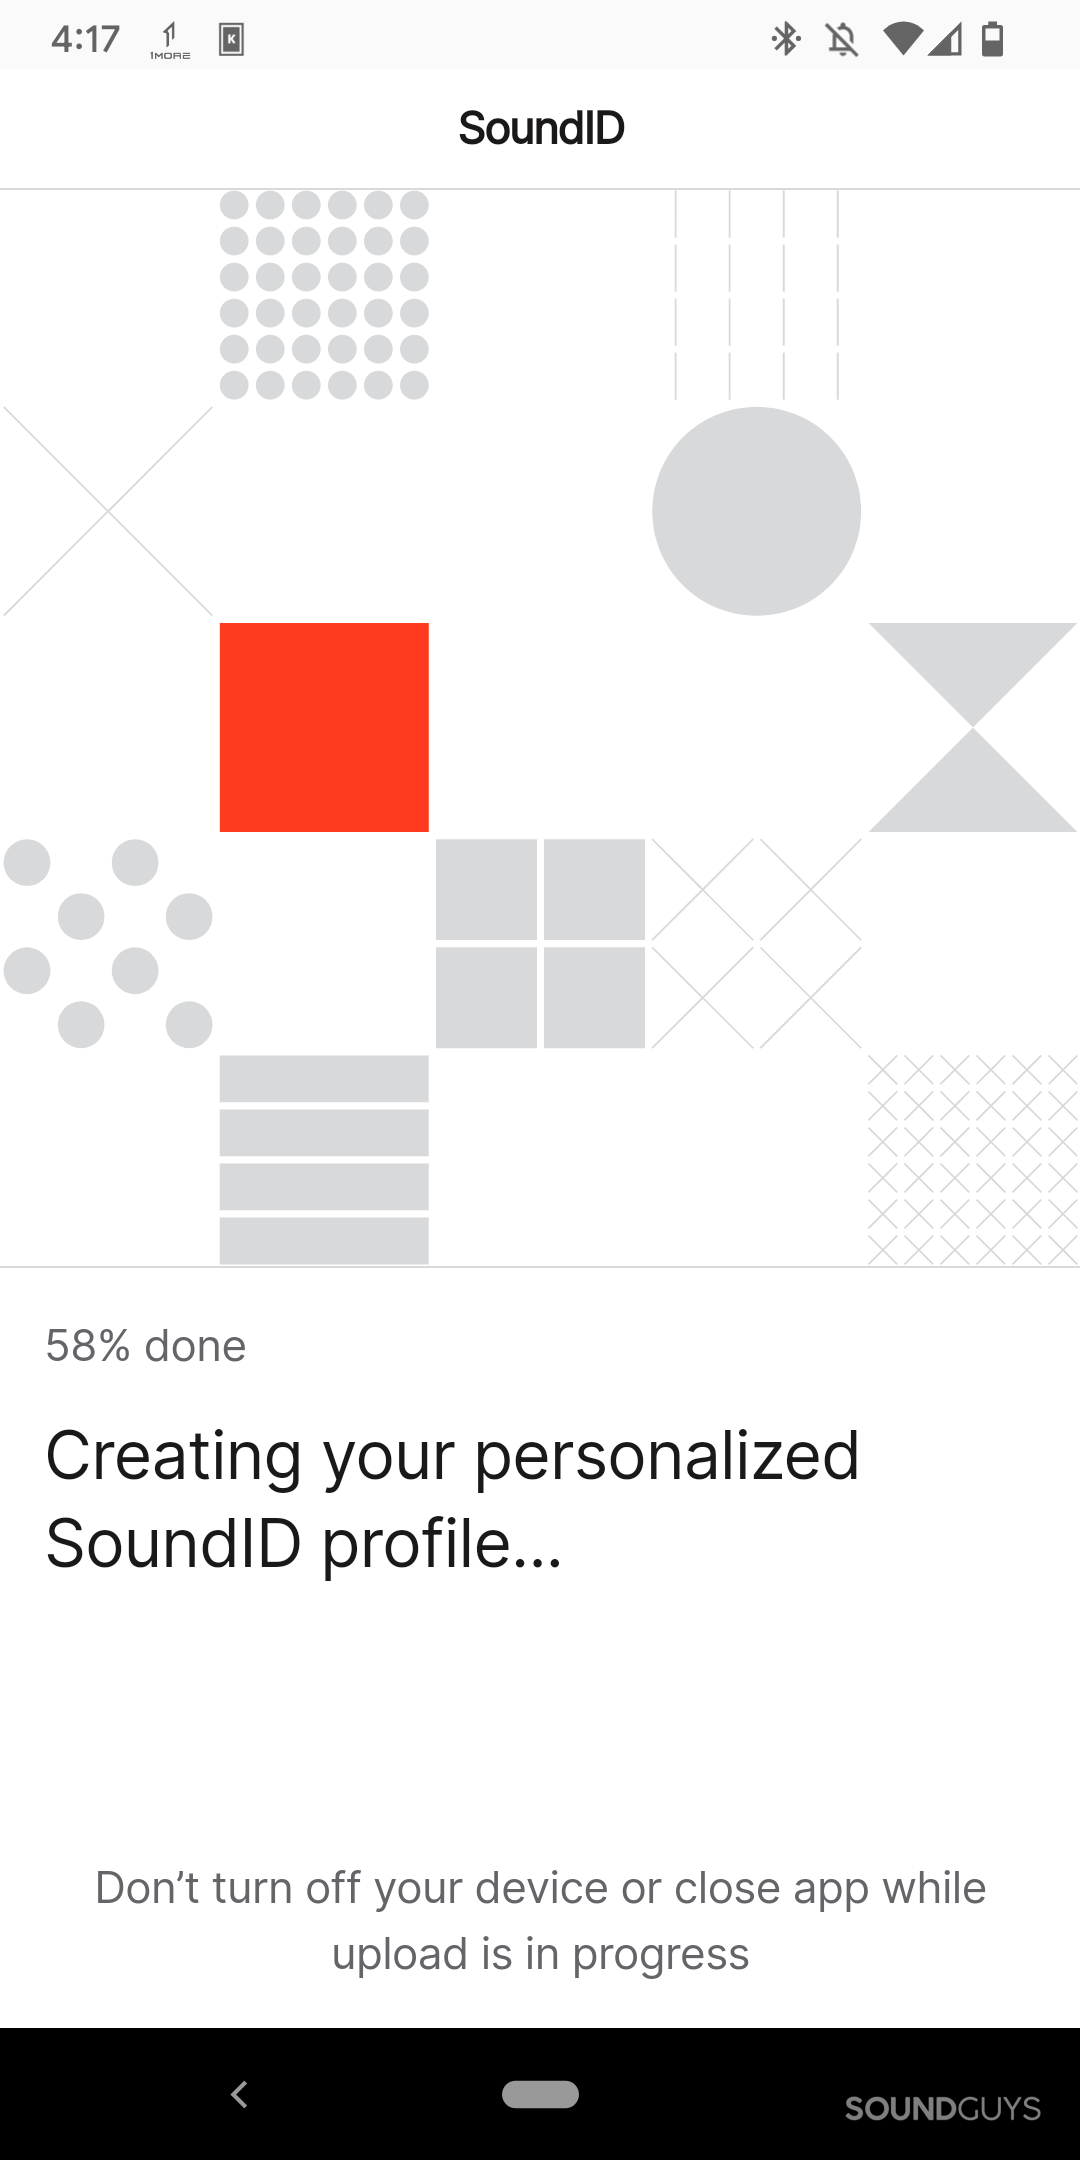 A screenshot of a finished SoundID session showing the "Creating your personalized SoundID profile" screen.